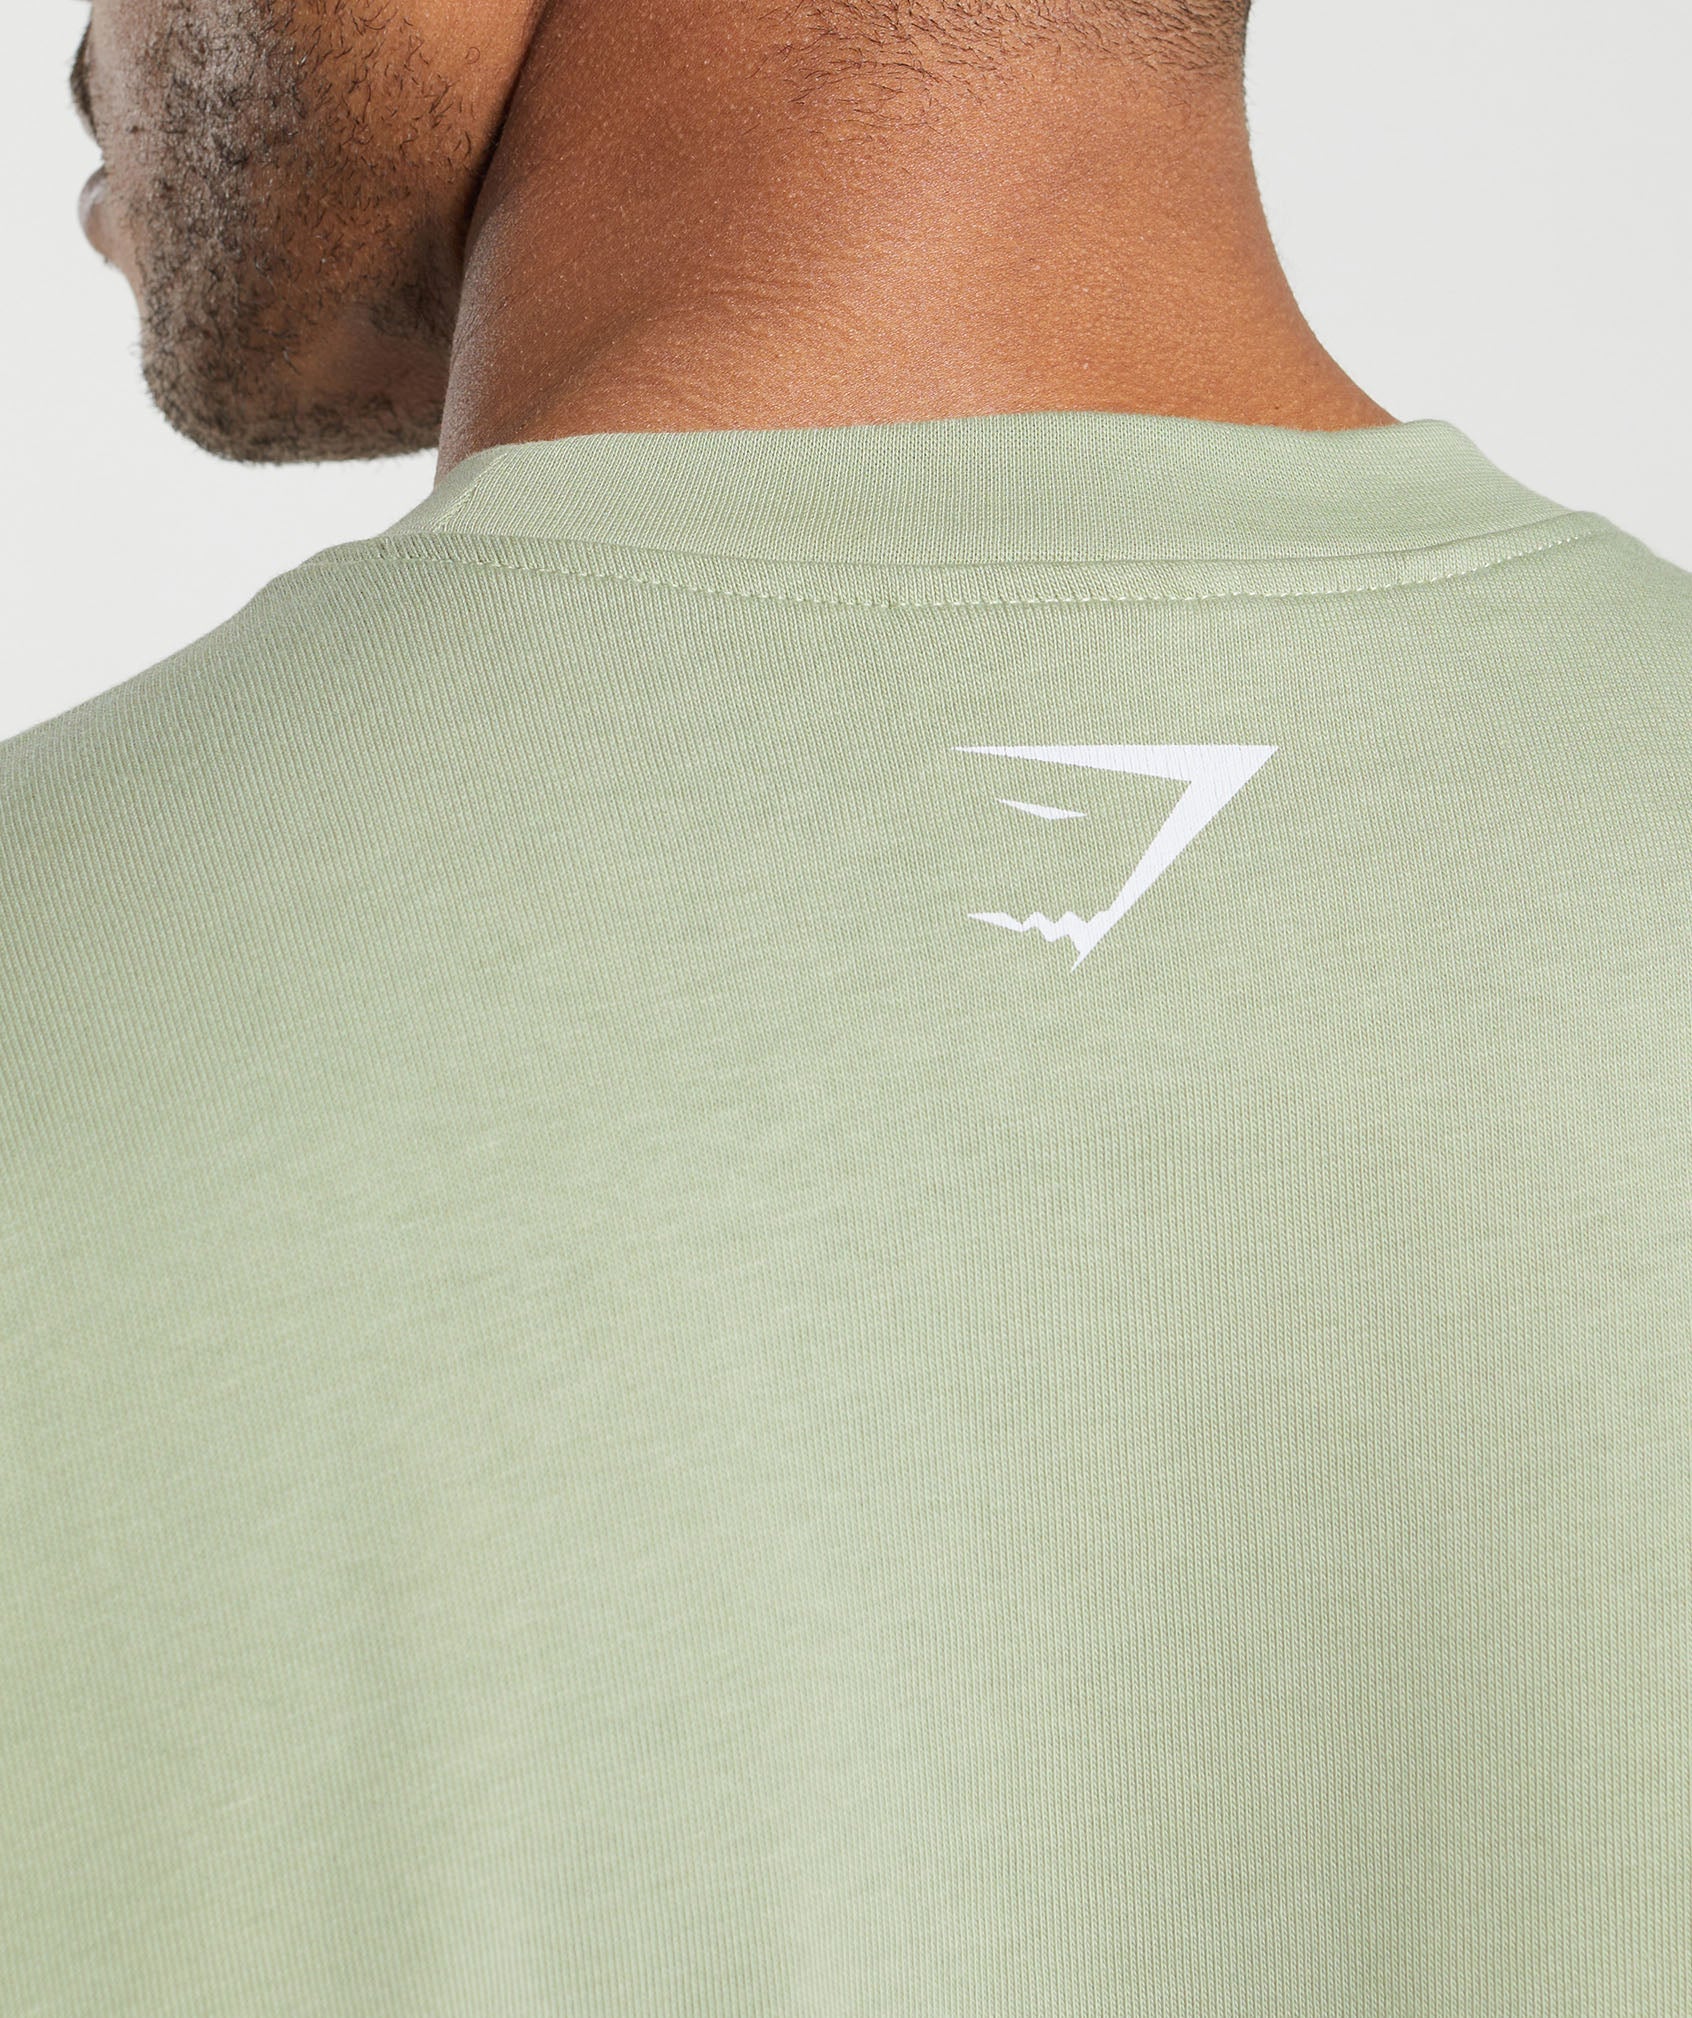 Collegiate T-Shirt in Faded Green - view 6